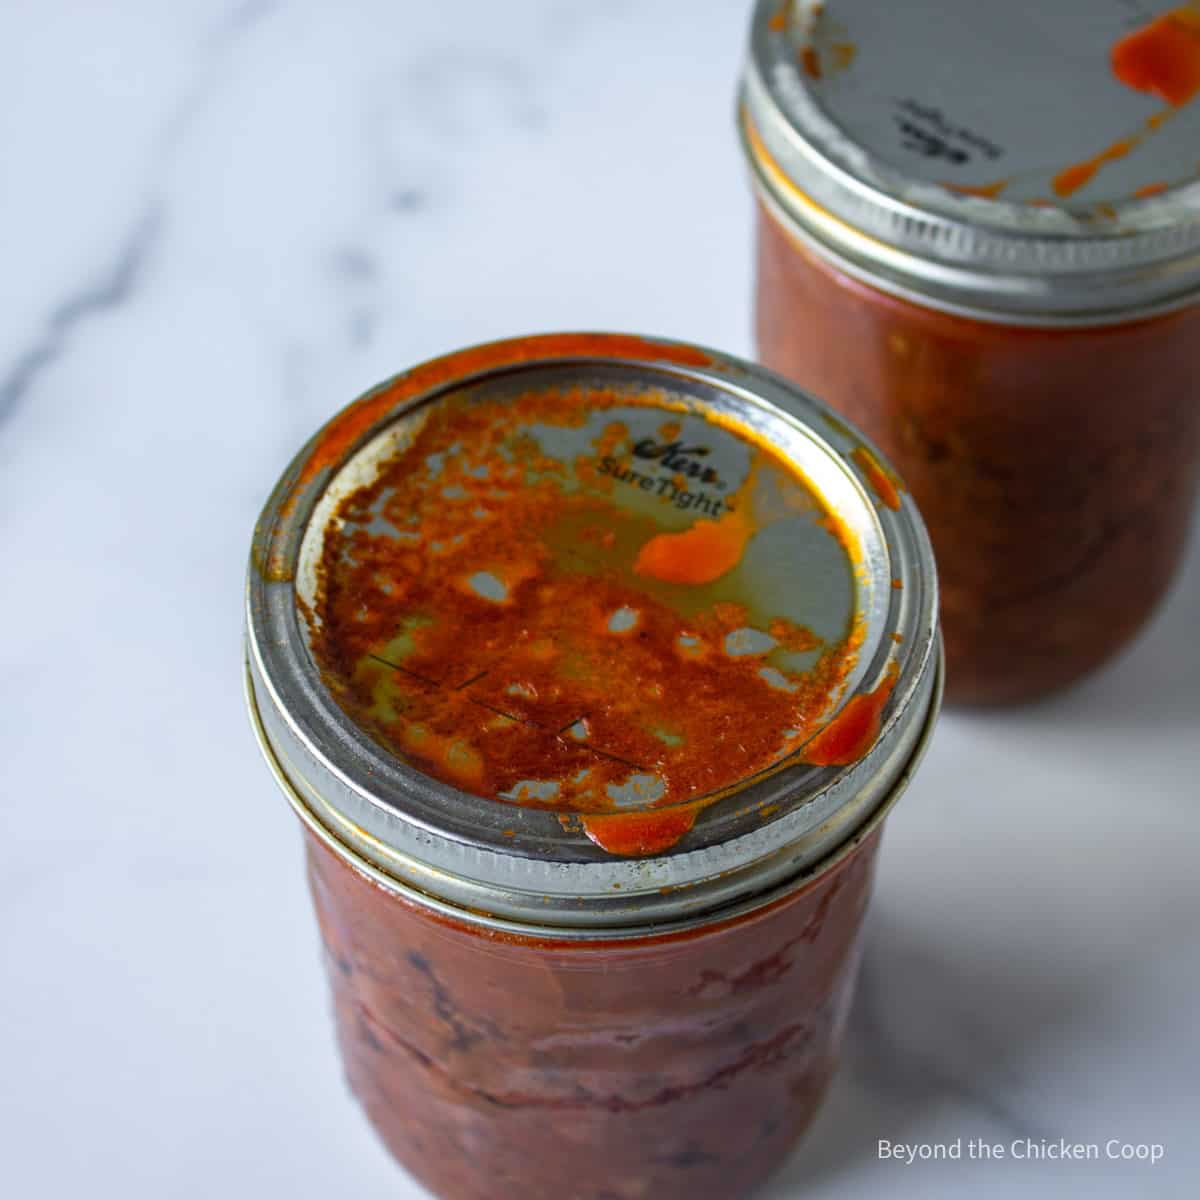 A messy canning jar filled with chili.